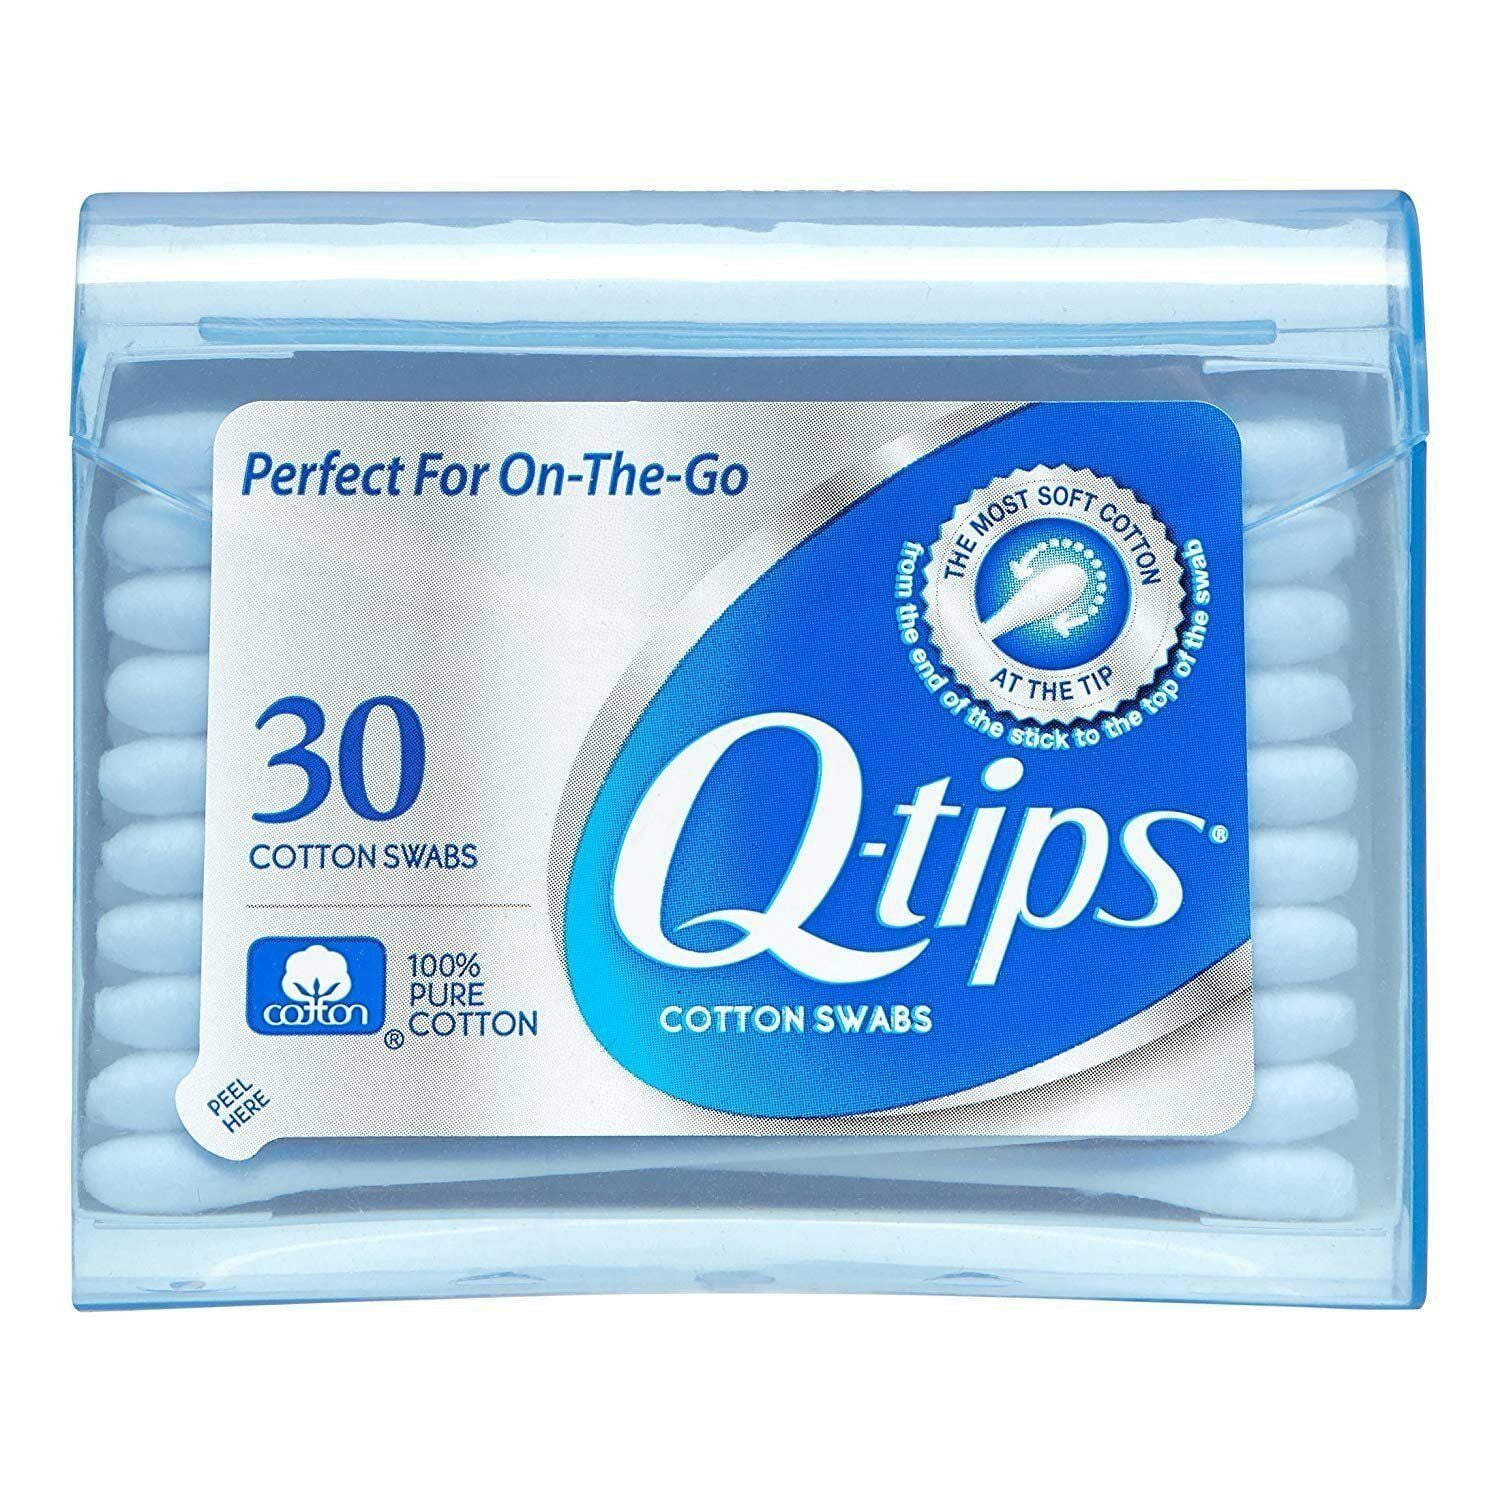 Q-tips Cotton Swabs Travel size, 30 Count, (Pack of 16)